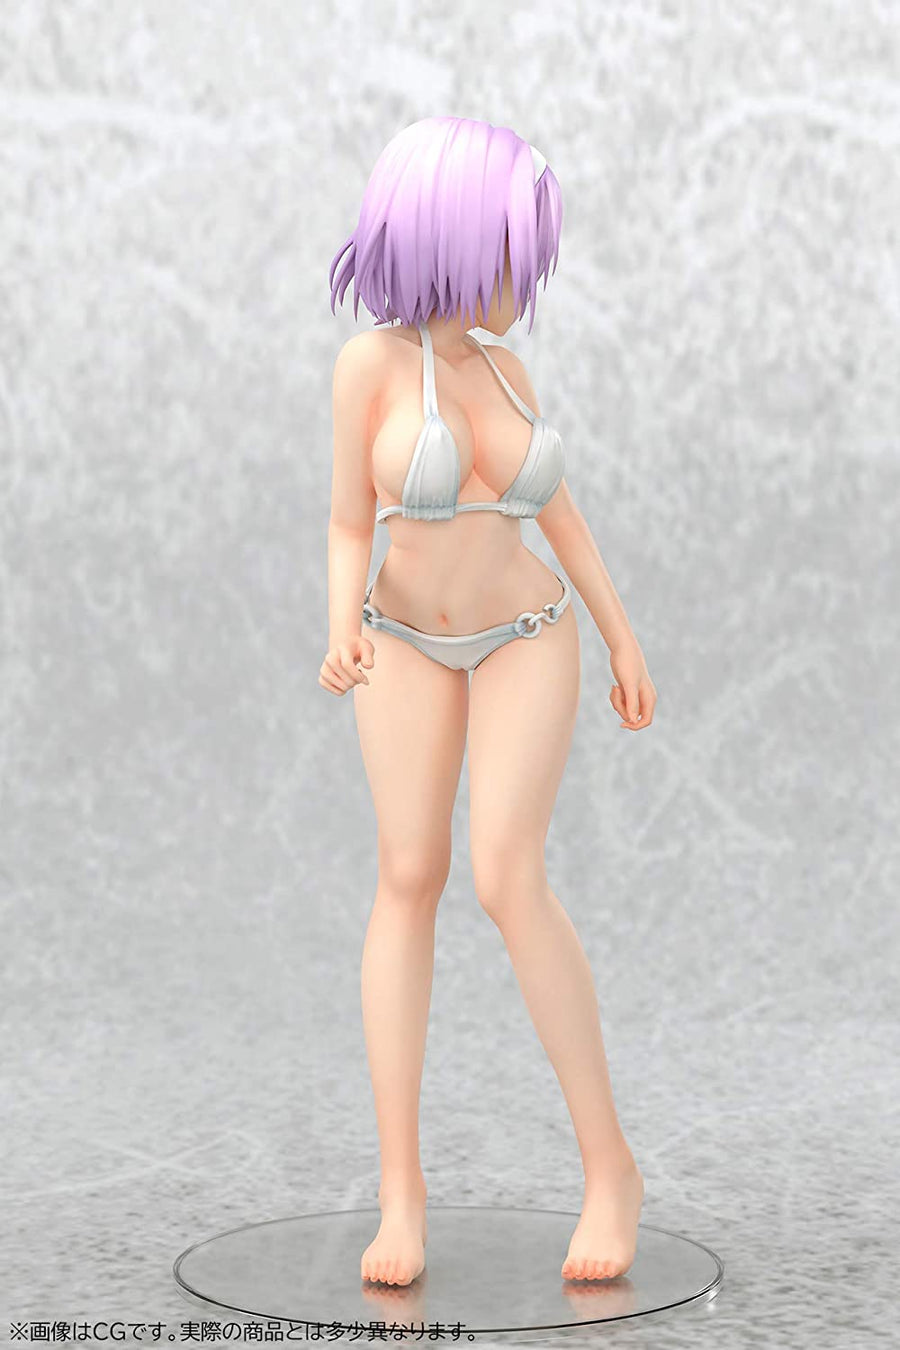 Original Character - Swimsuit Girls Collection - Minori - 1/5 - With Feet Ver. (Insight)